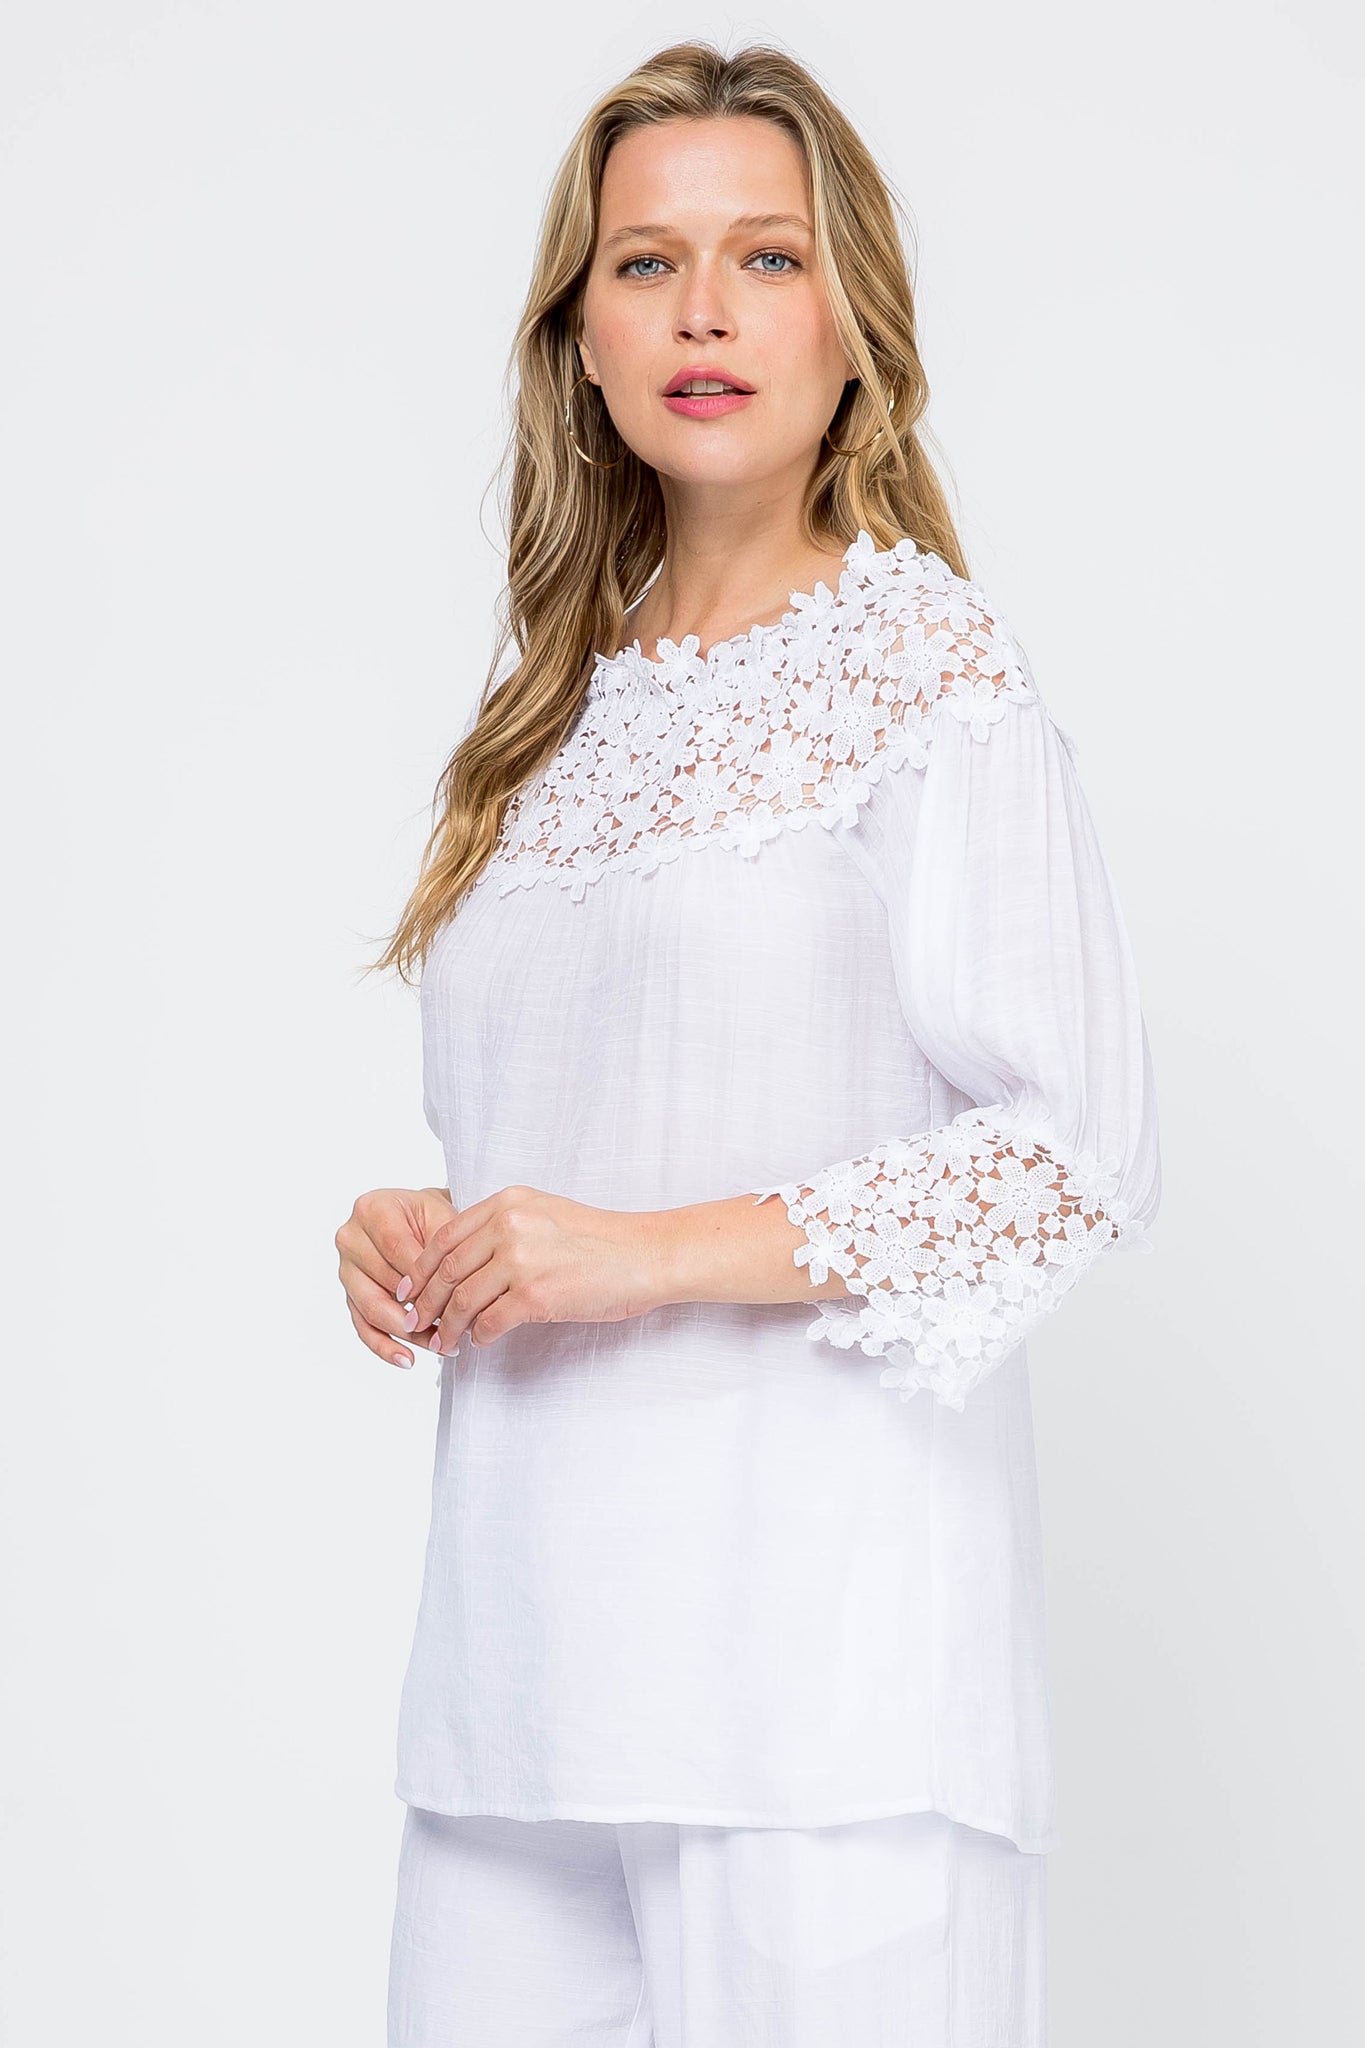 Women's Casual Crochet Trimmed Scoop Neck ¾ Sleeve Tunic Top - Mojito Collection - Vacation Clothing, Women's Clothing, Women's Resort Wear, Women's Top